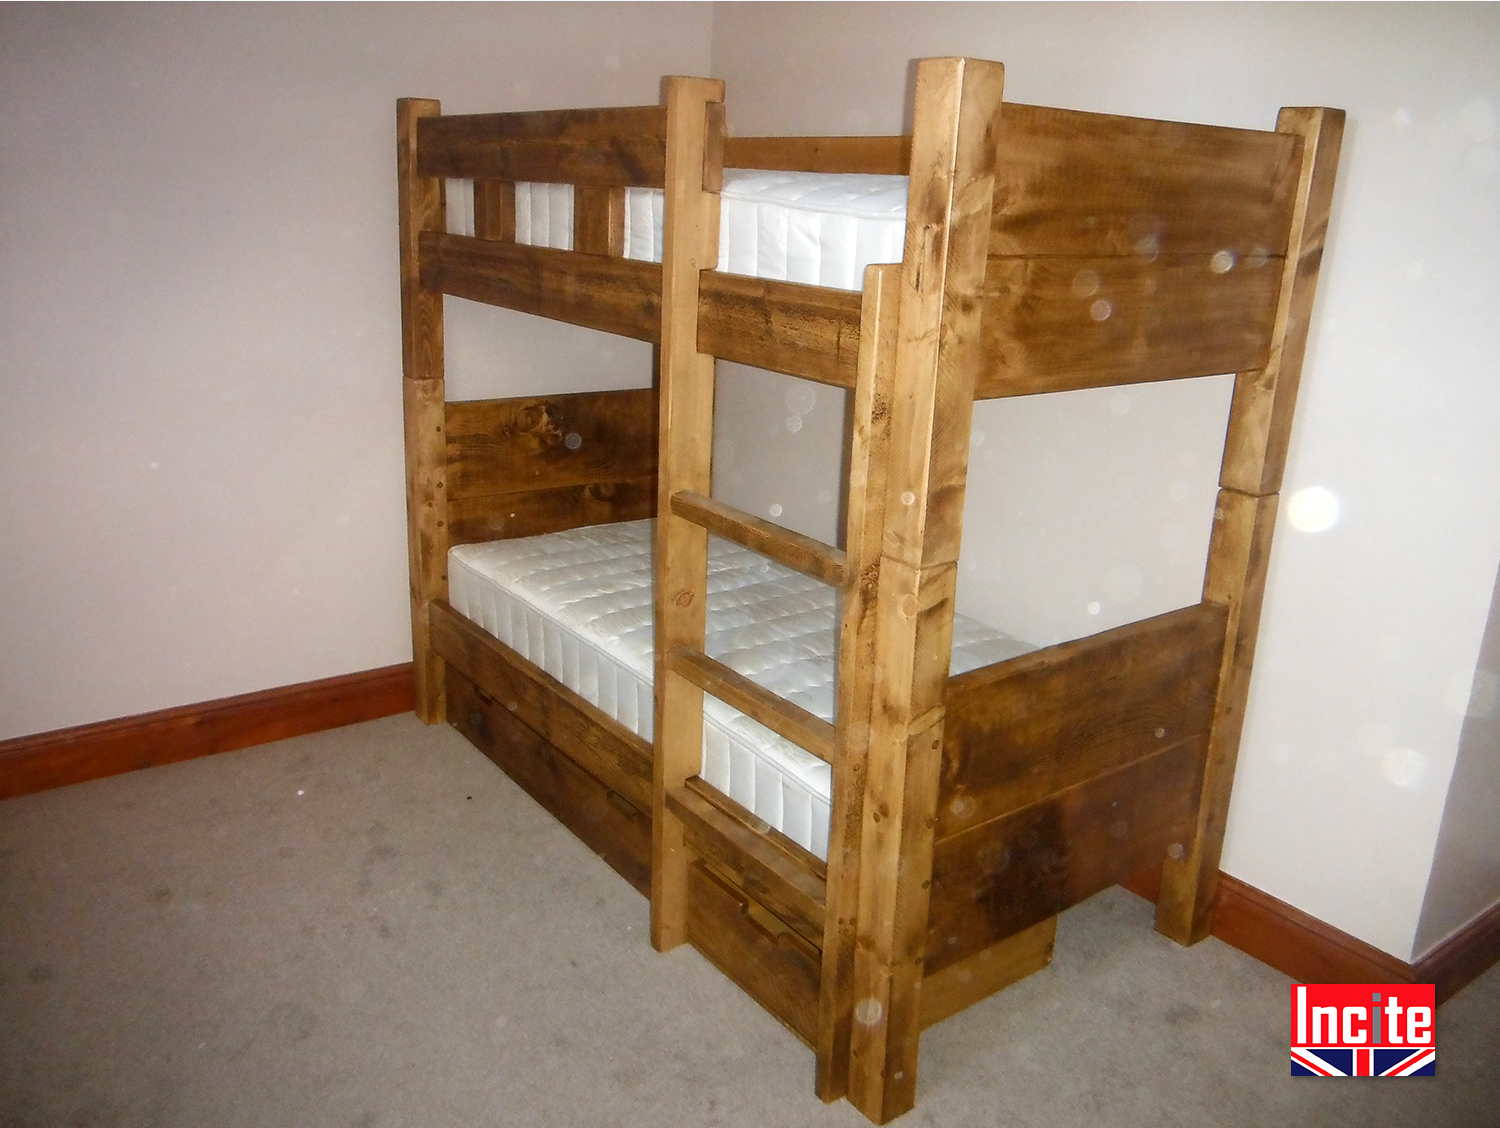 Wooden Plank Bunk Beds Handmade By, Old Wooden Bunk Beds